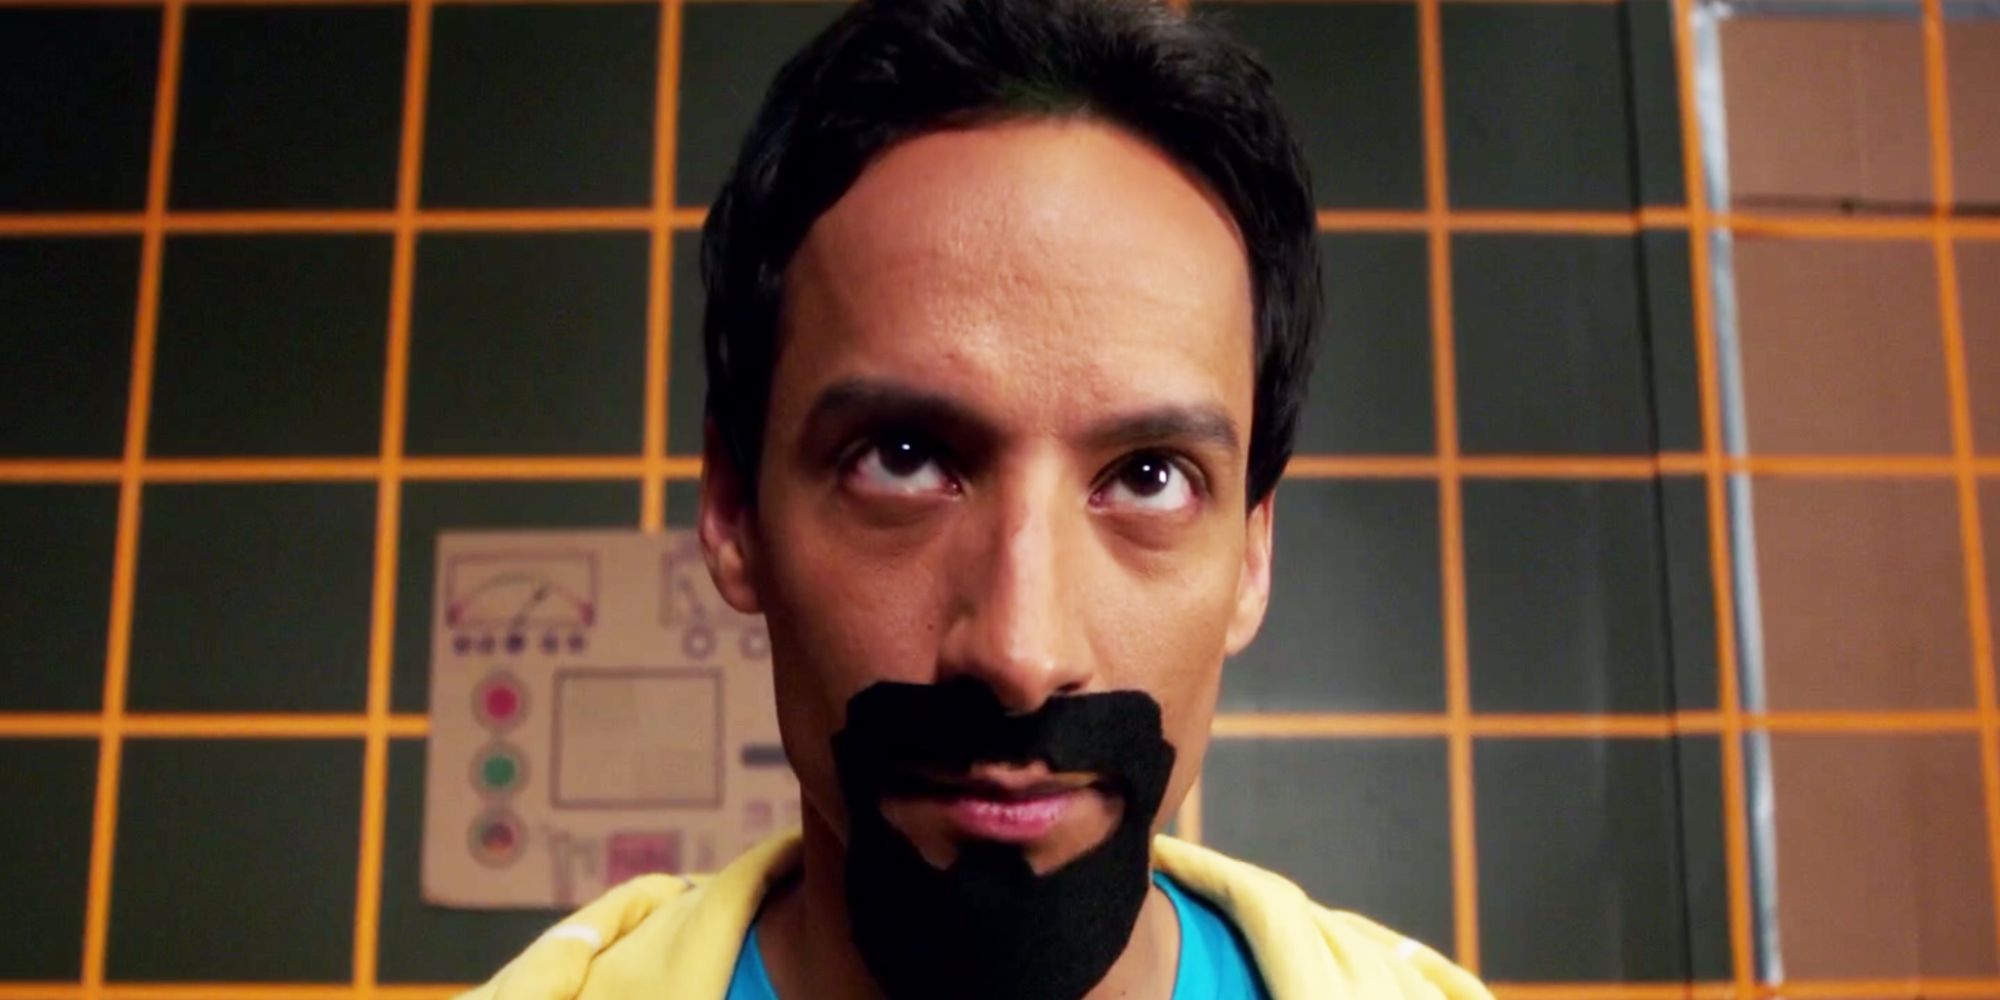 Abed (Danny Puddi) as Evil Abed, wearing a goatee, looking sinister